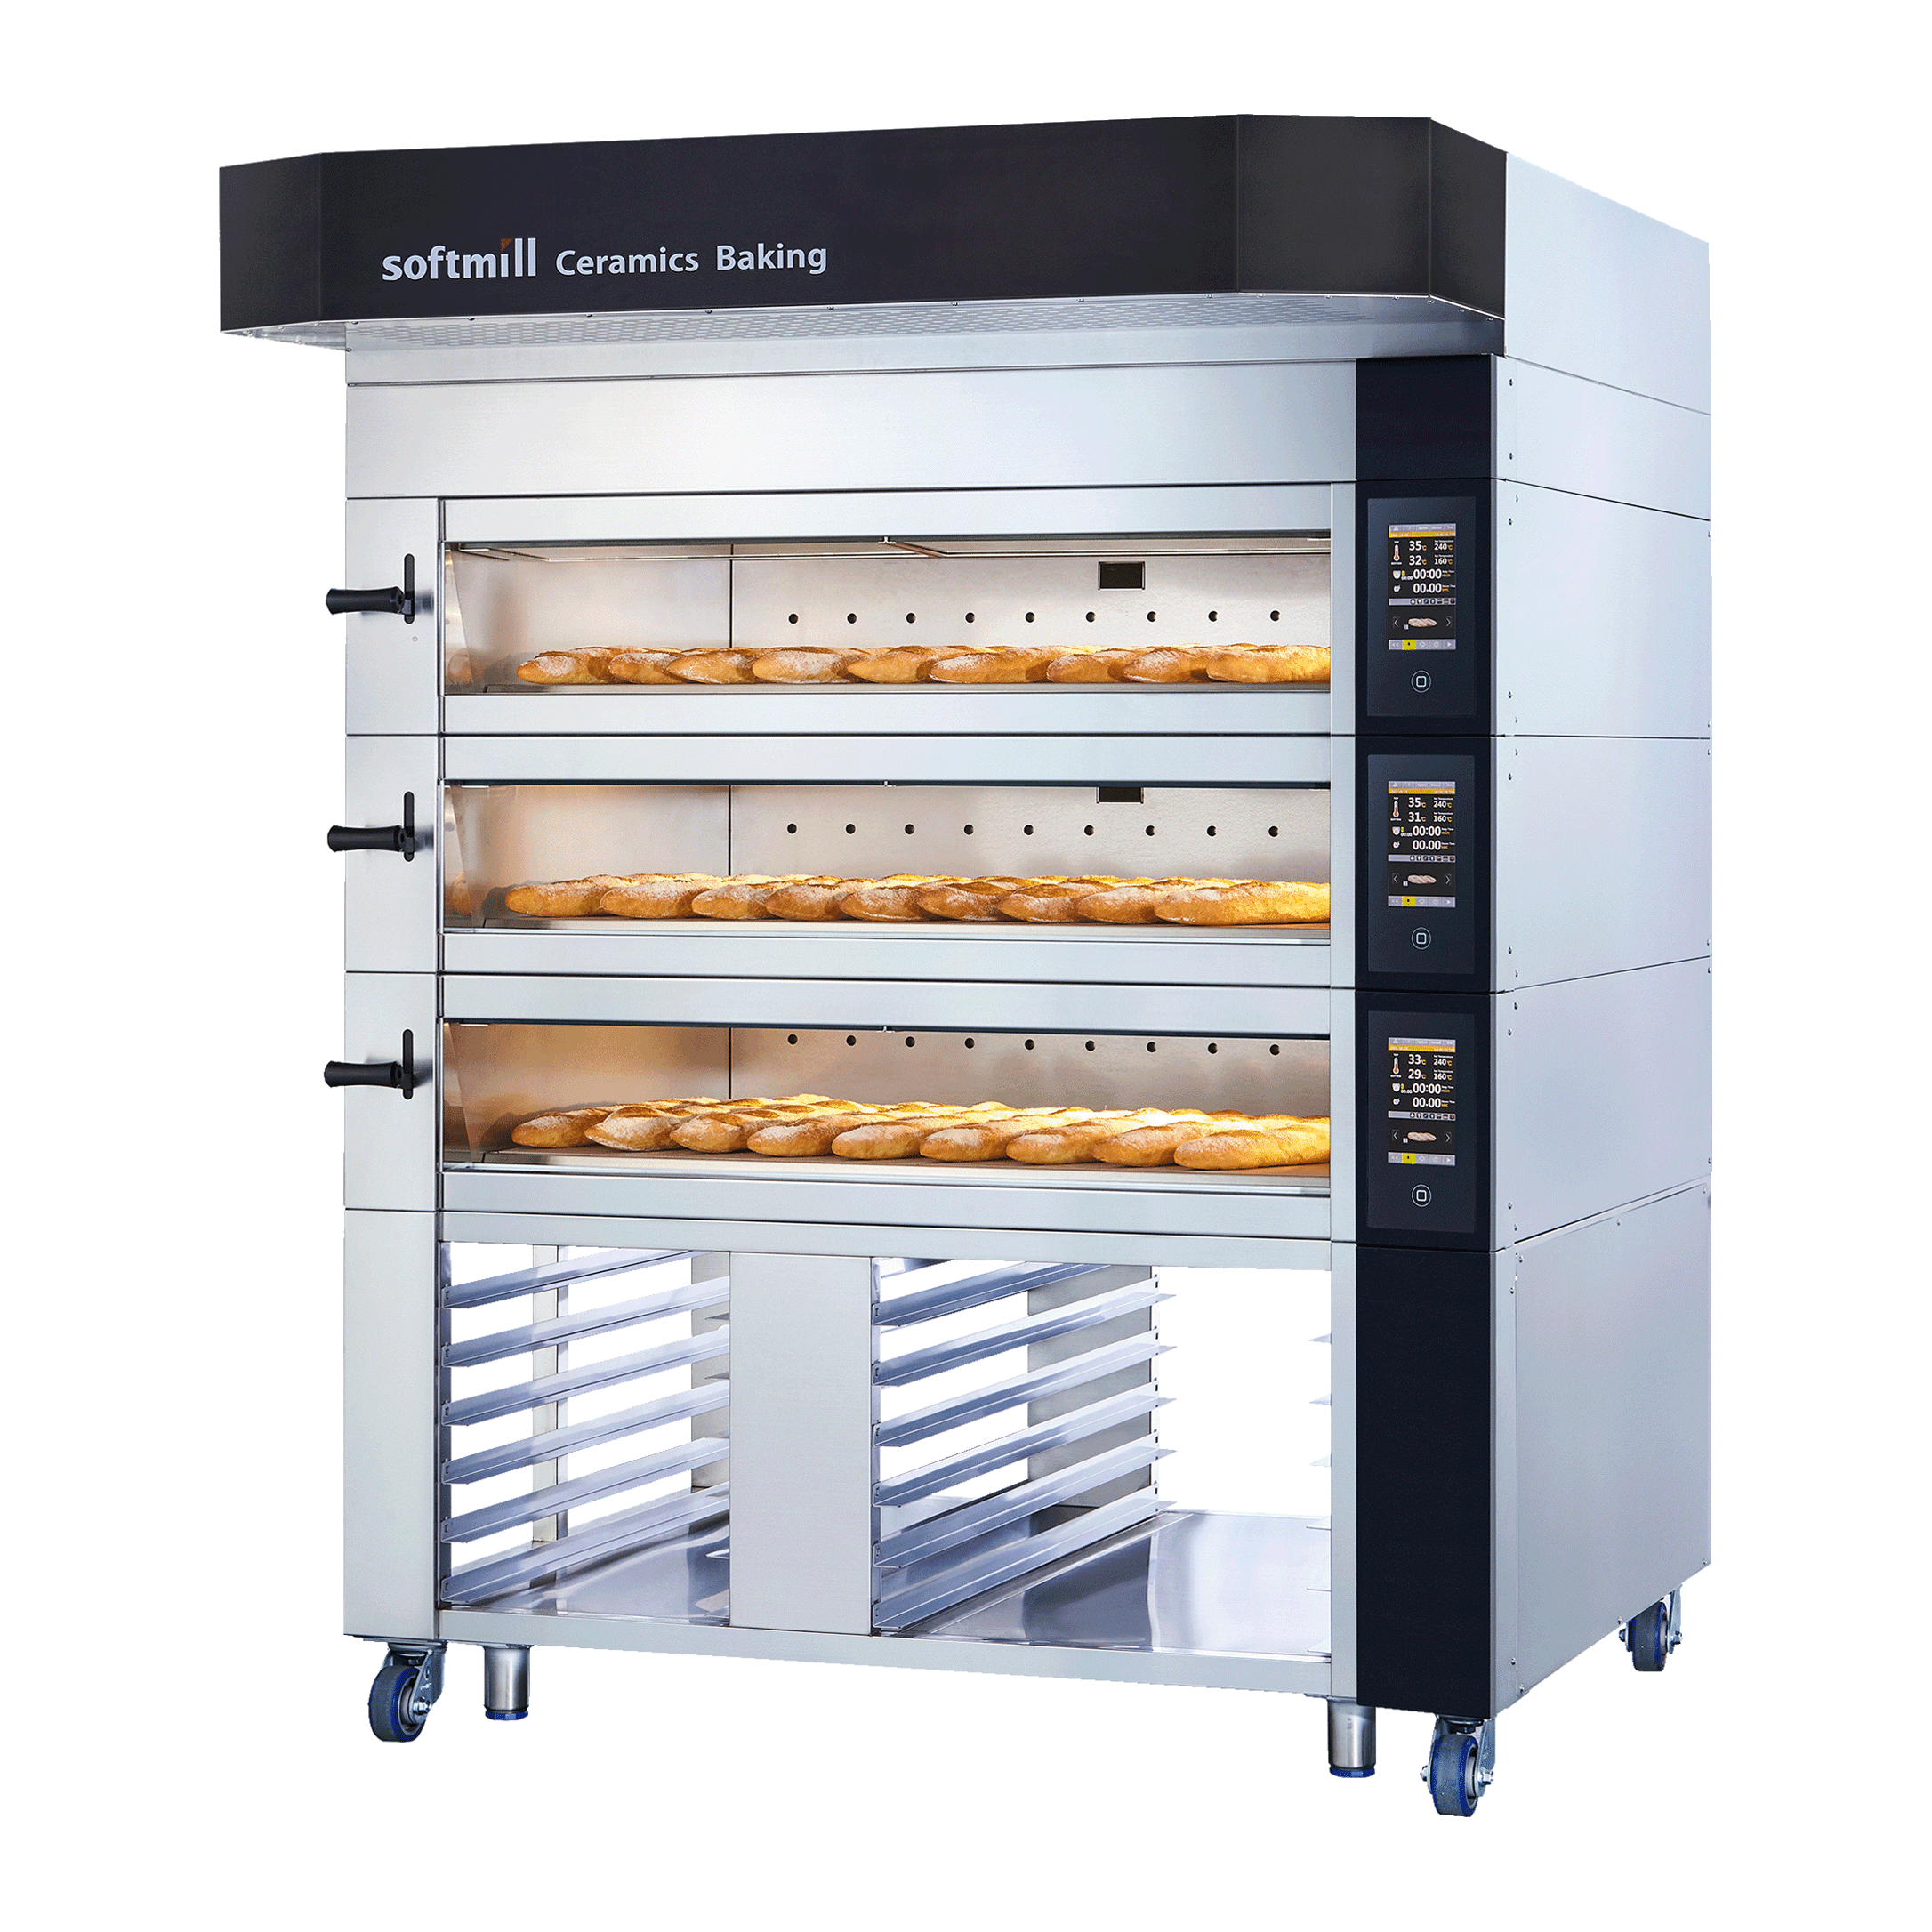 InnoBC Oven 4 trays 3 tiers detail page link